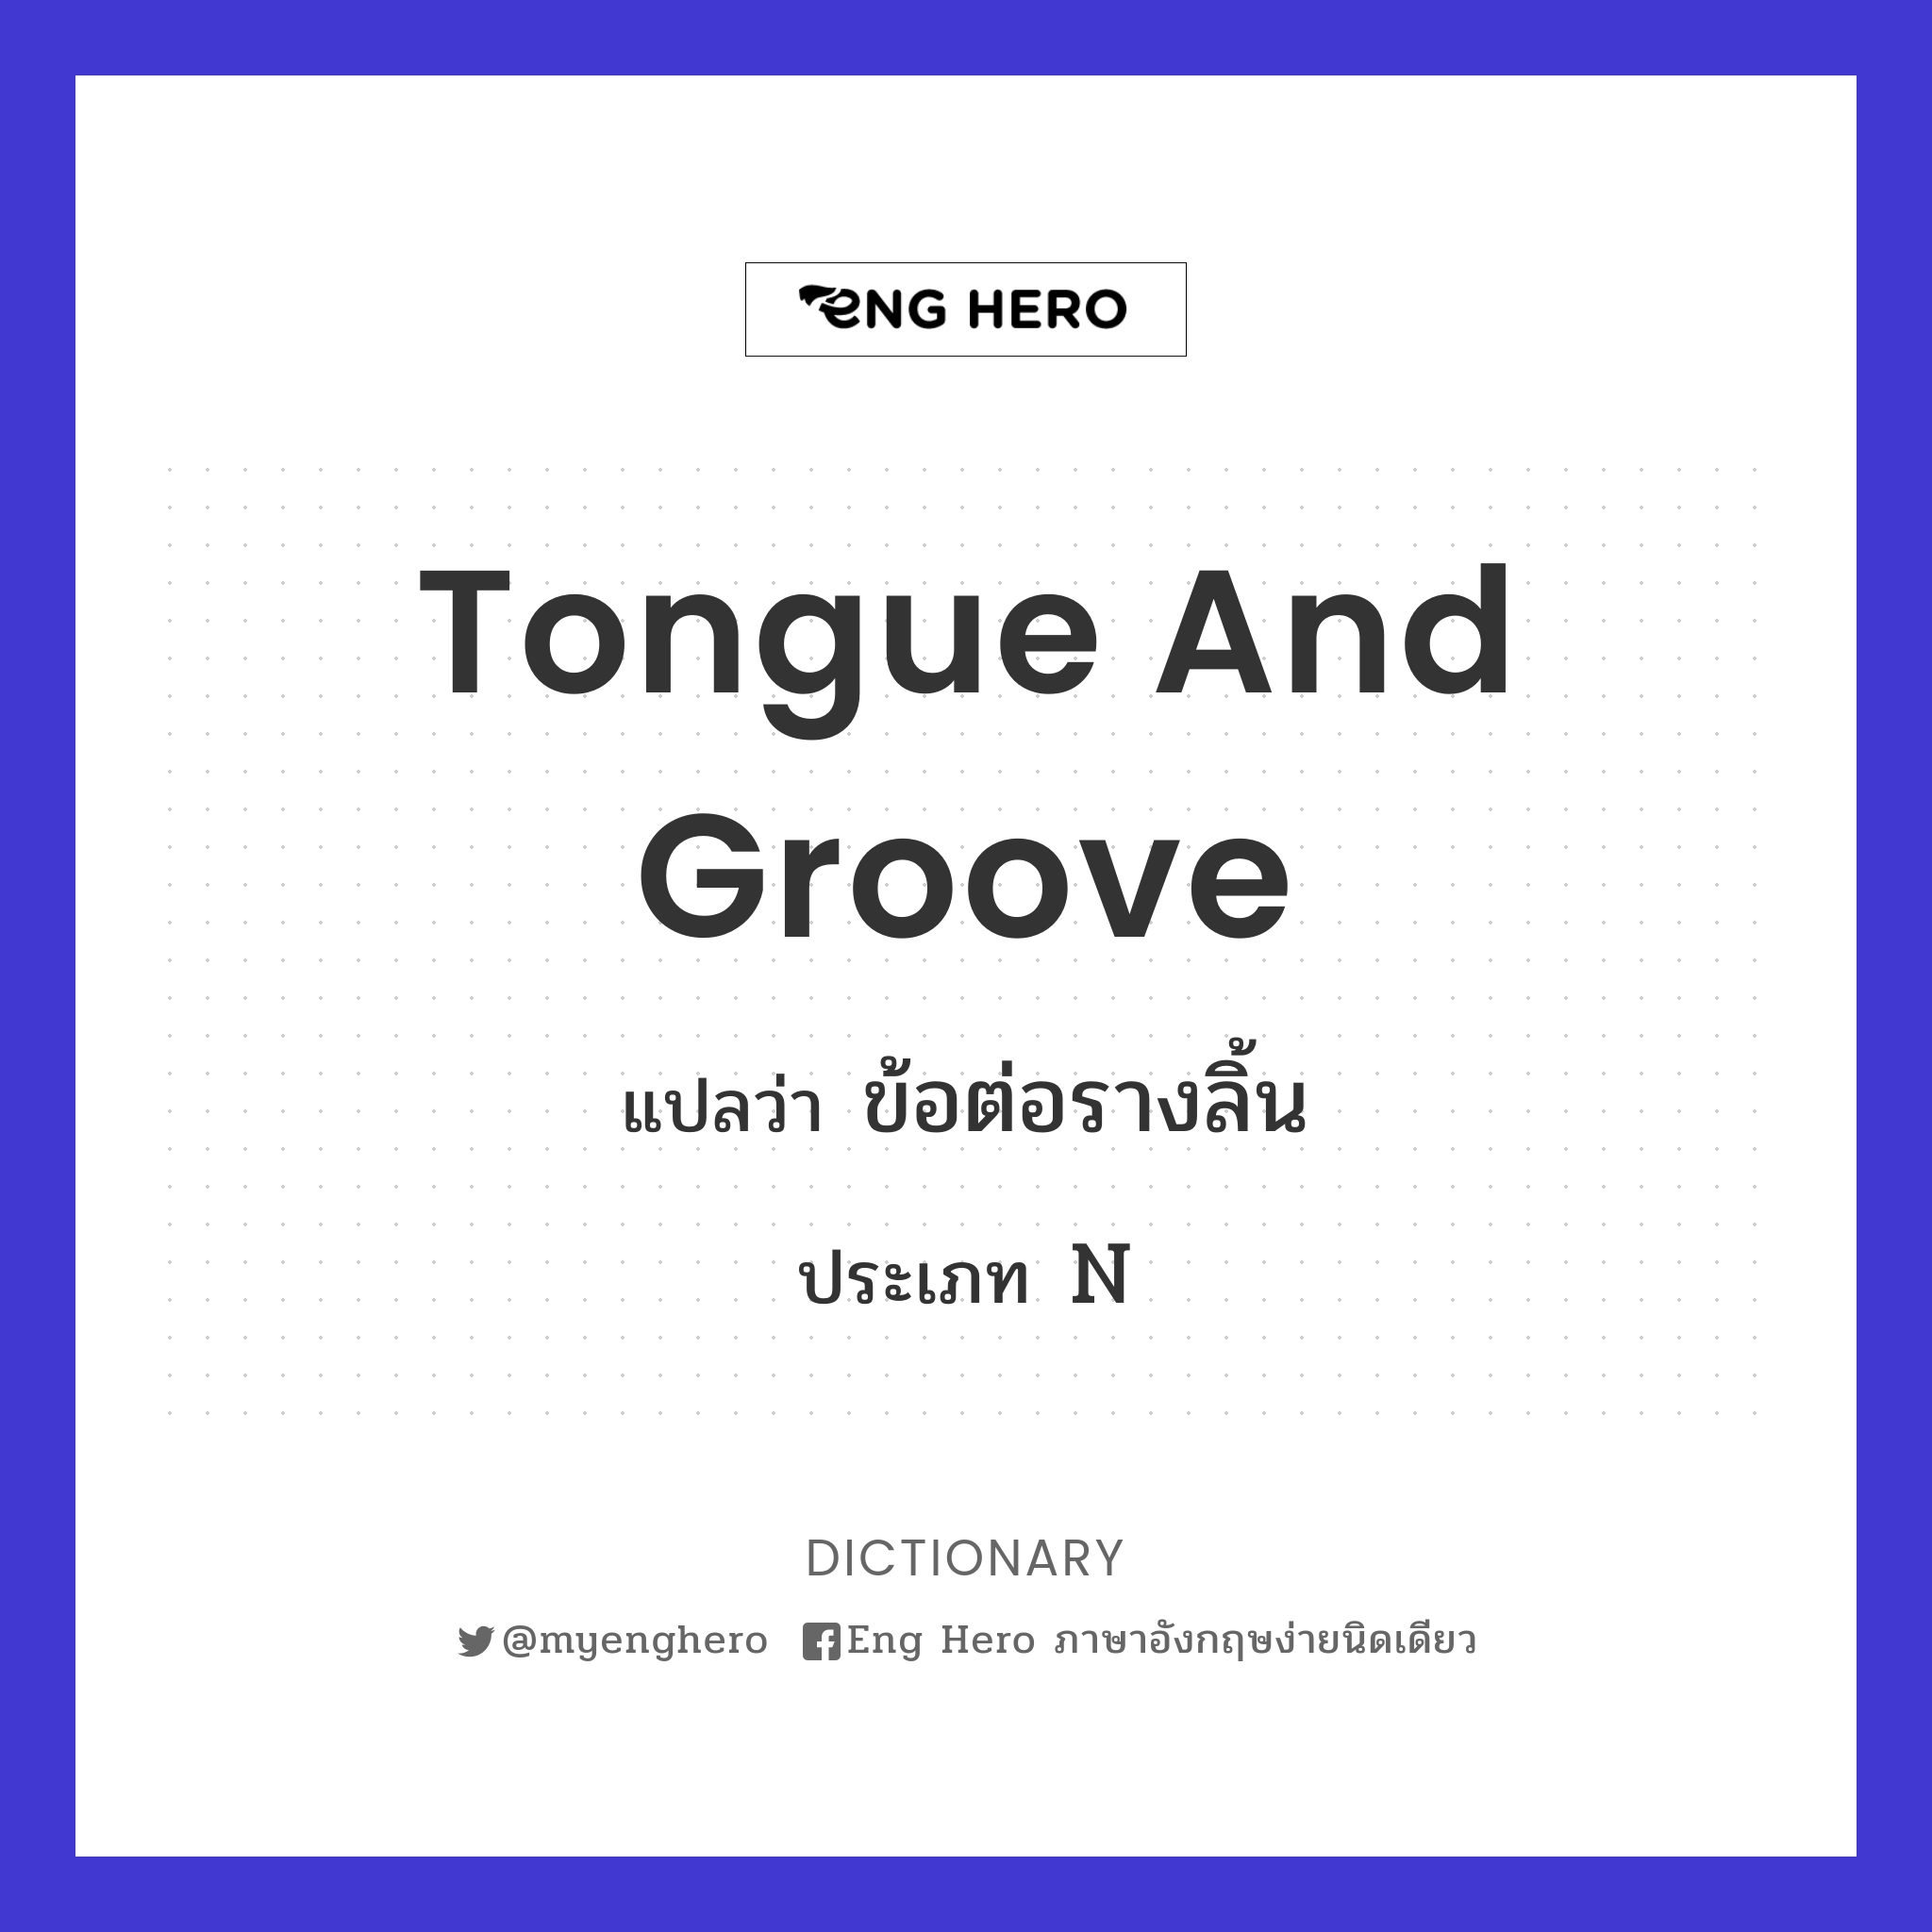 tongue and groove